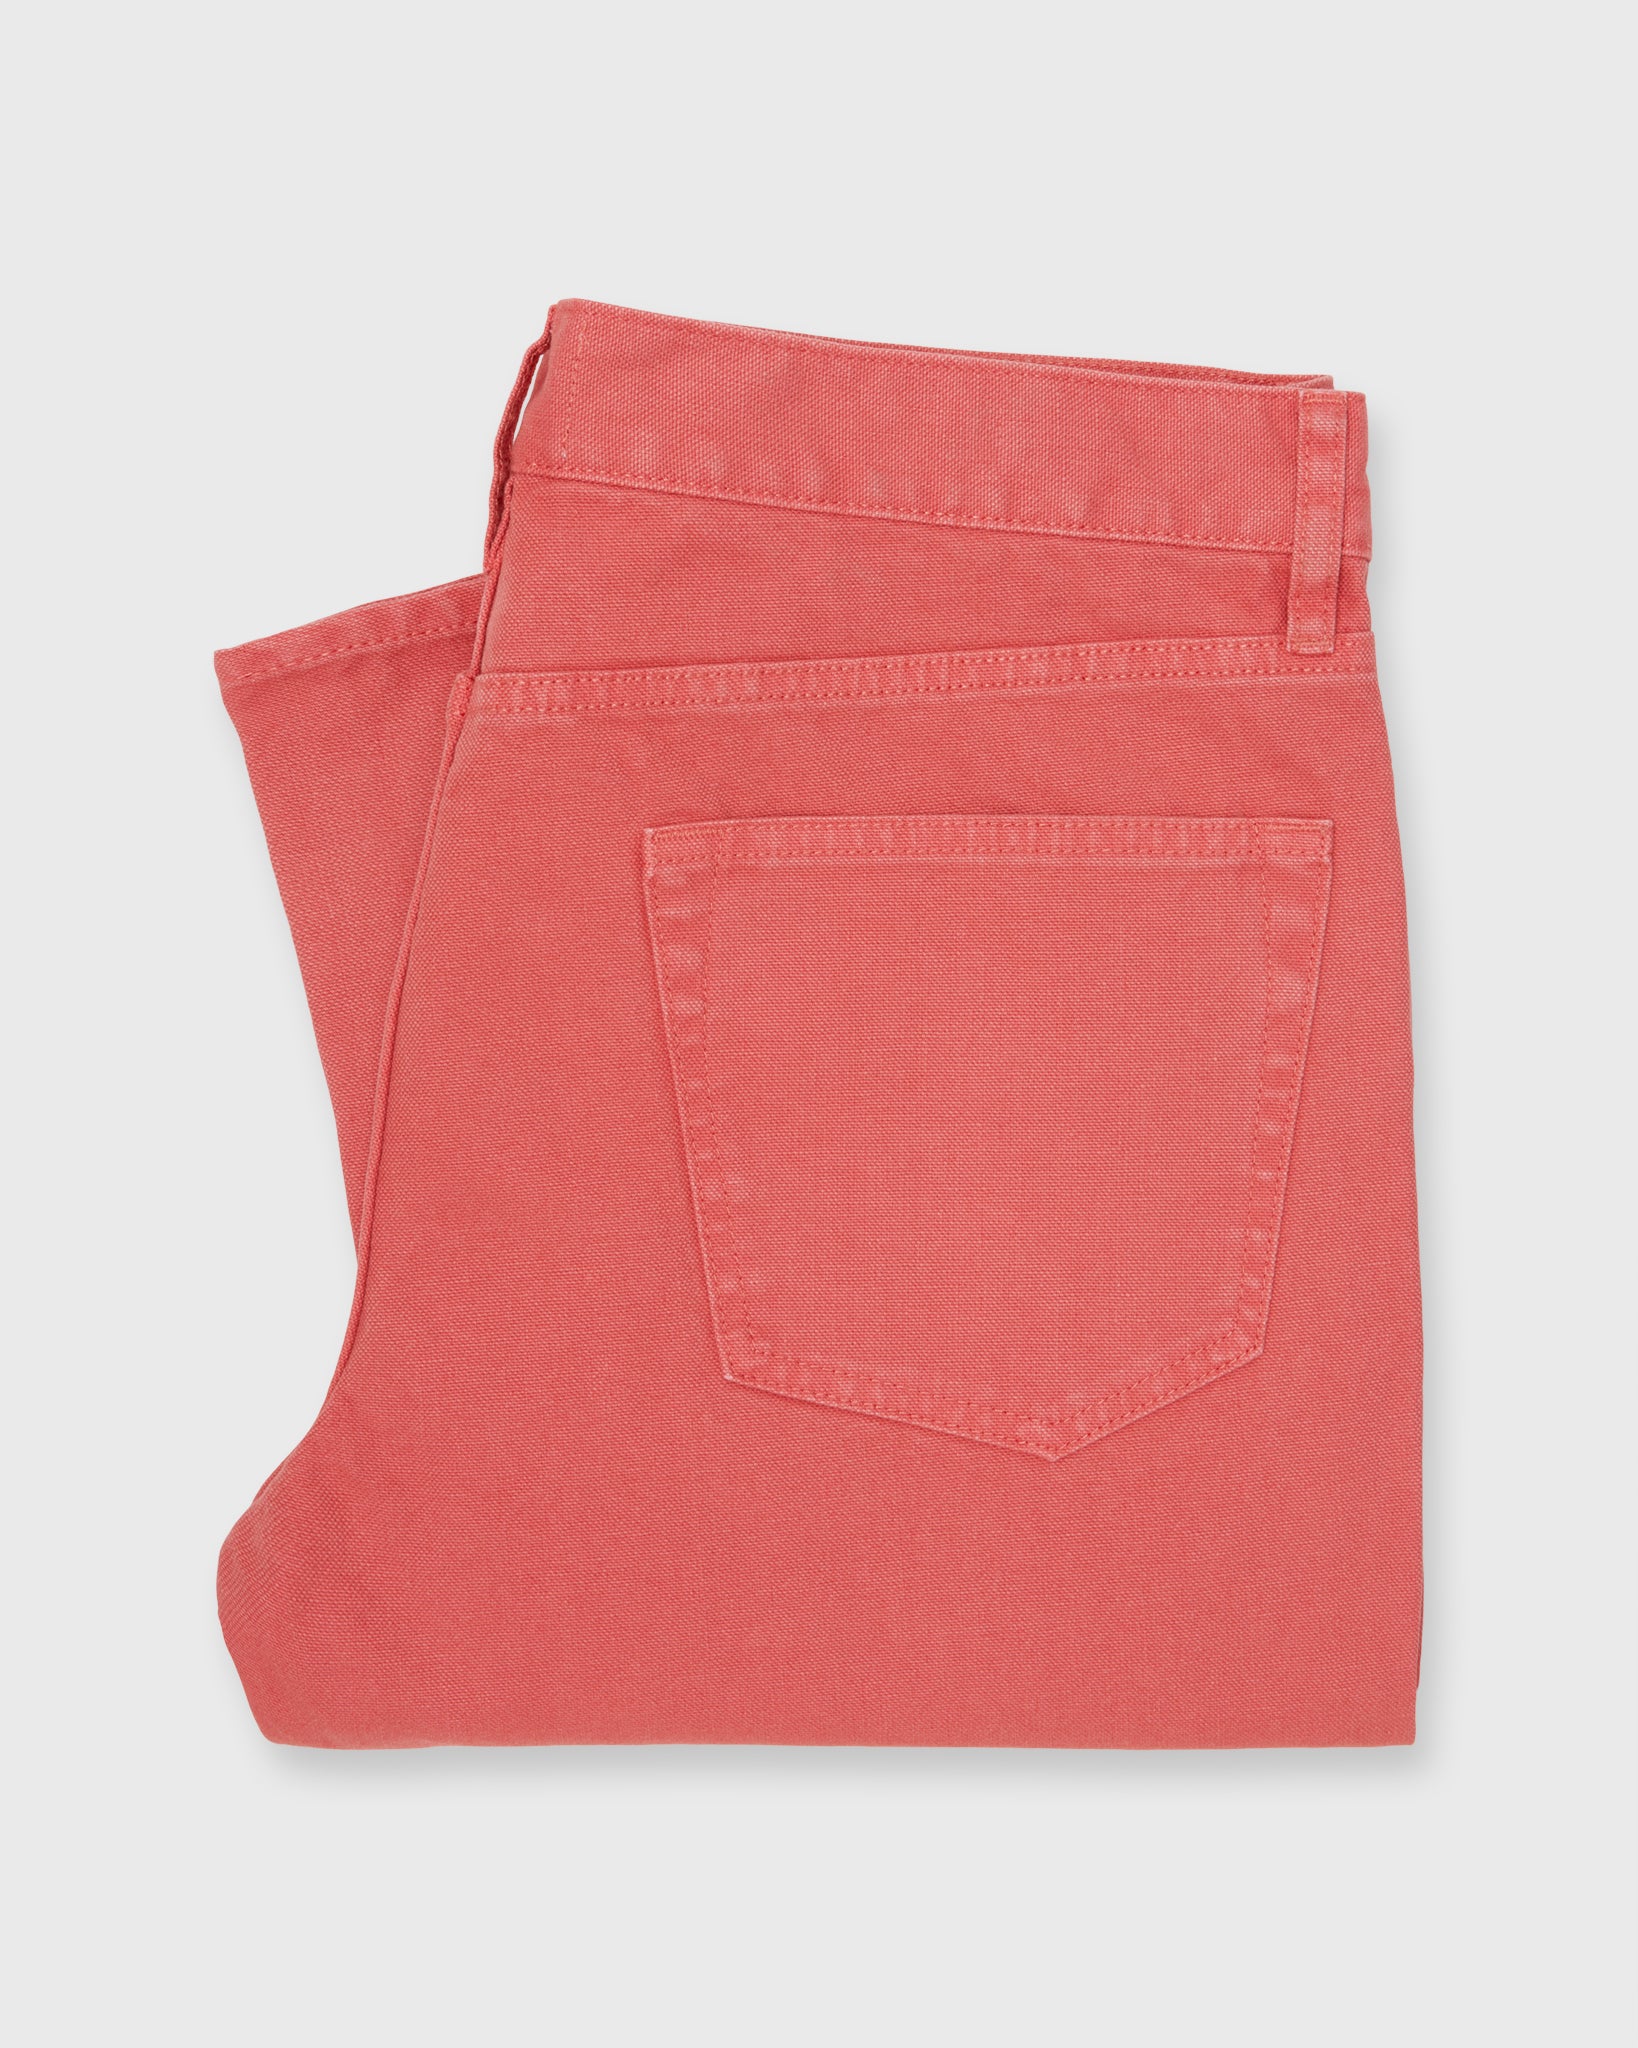 Slim Straight 5-Pocket Pant in Coral Canvas